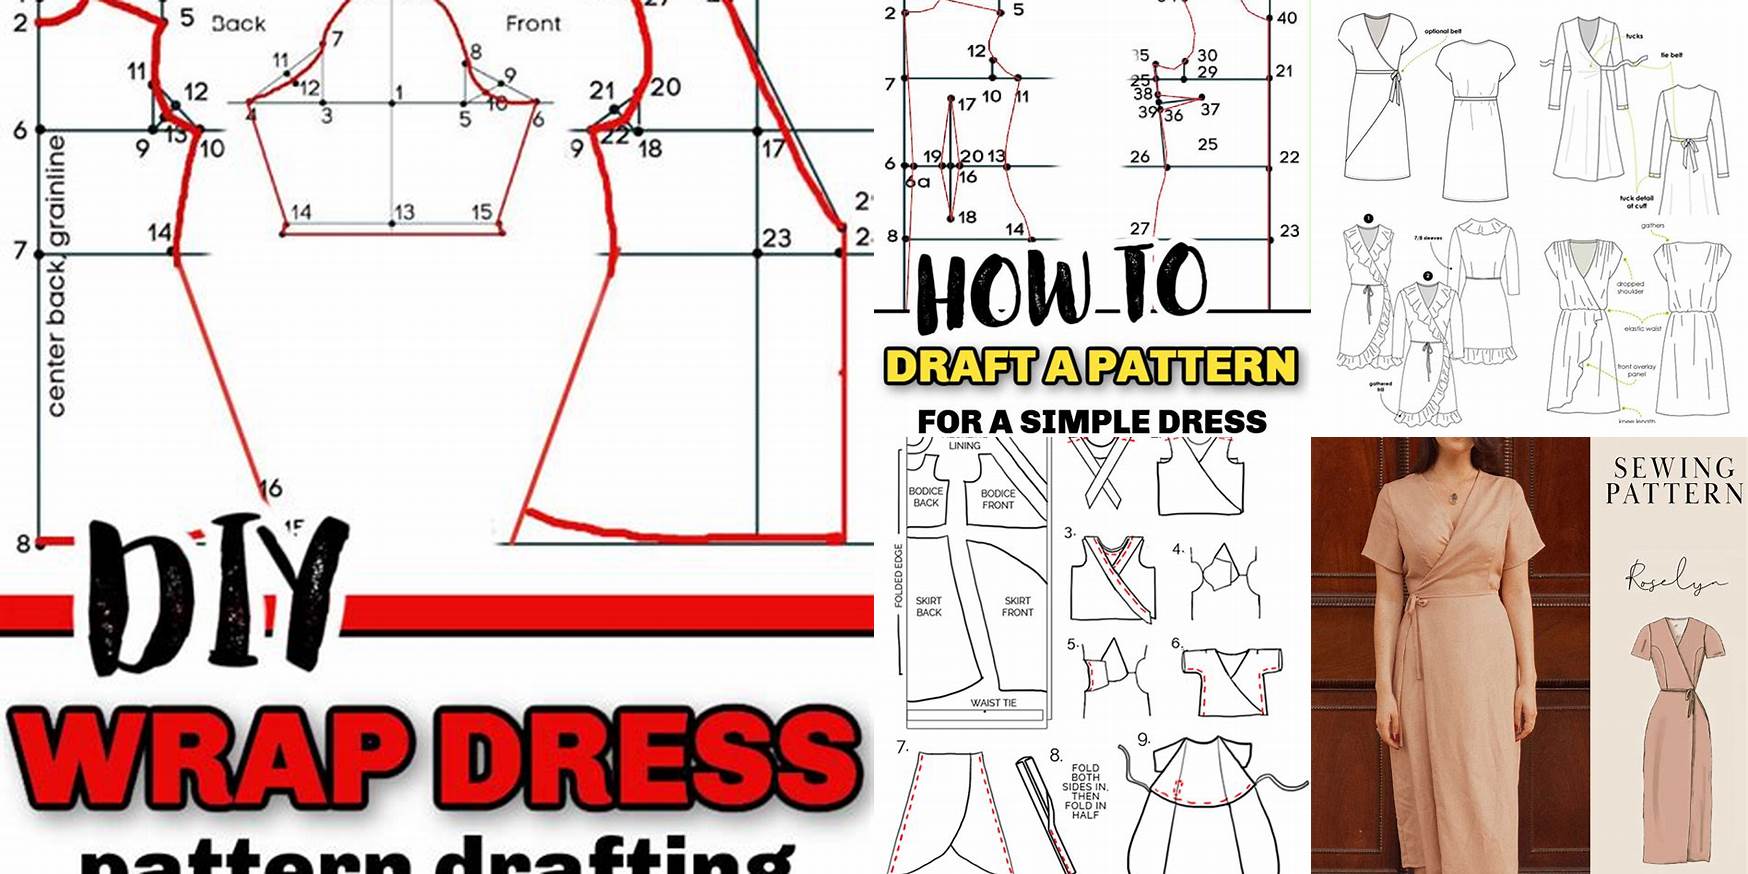 How To Draft A Pattern For A Wrap Dress